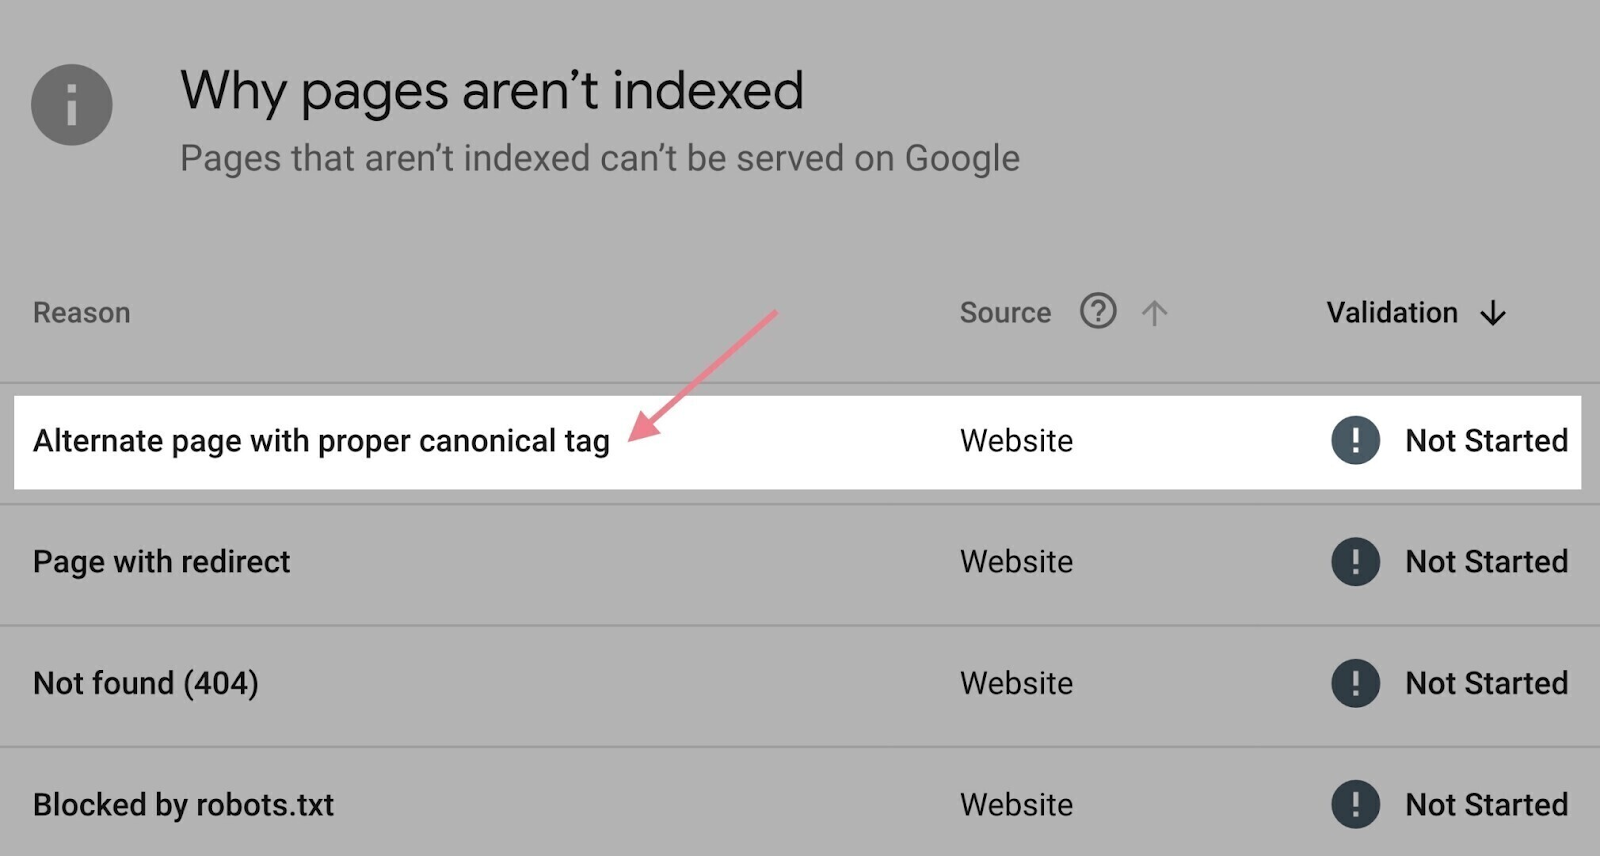 “Alternate page with proper canonical tag” reason highlighted